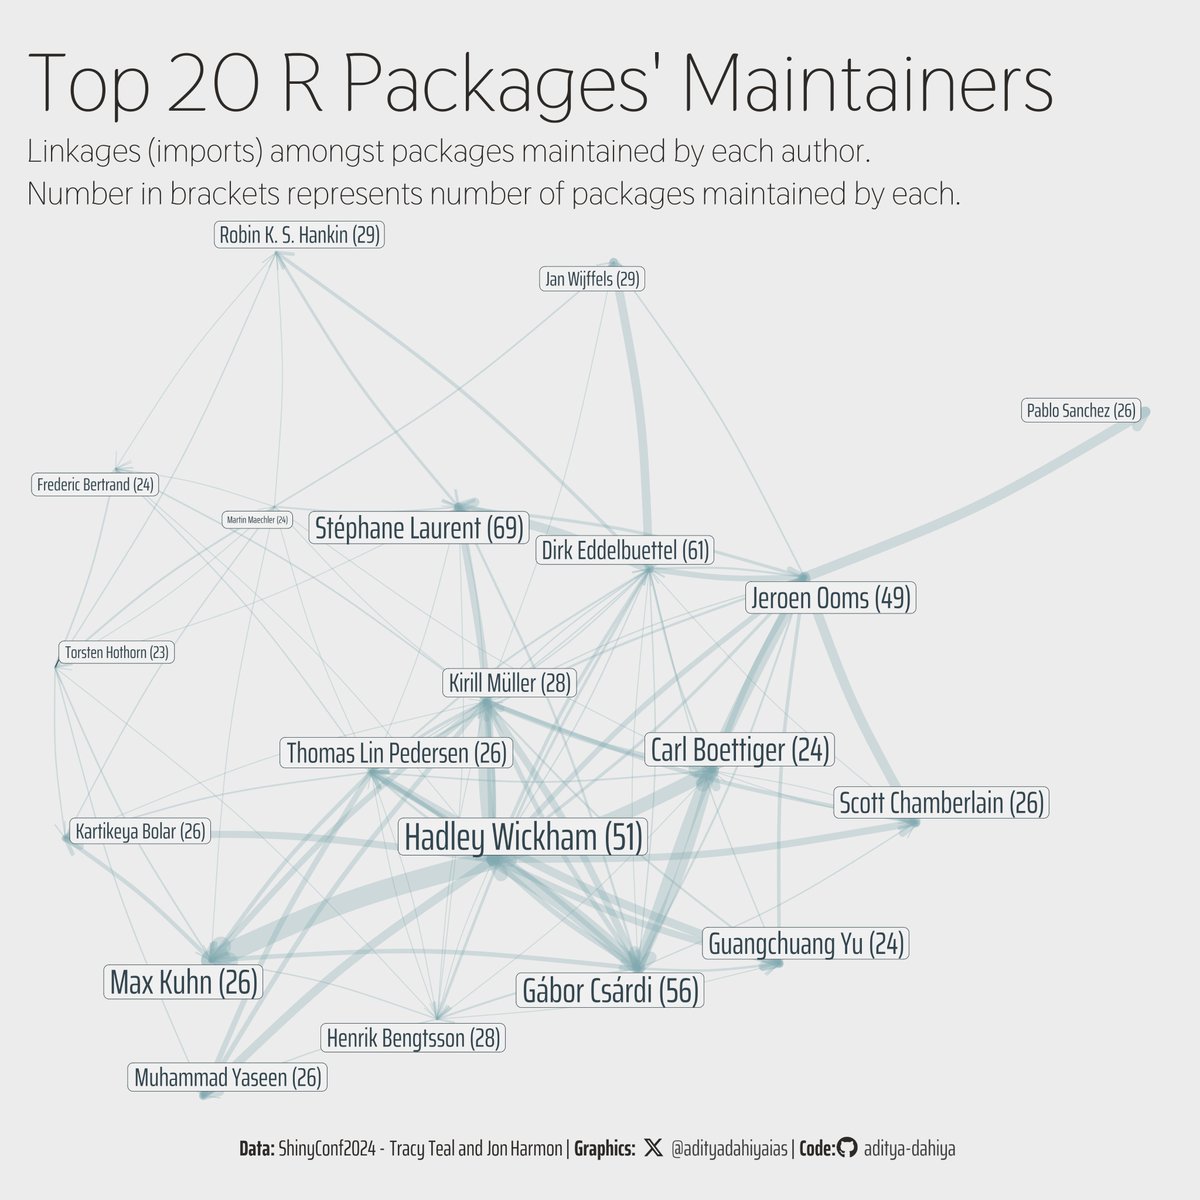 #TidyTuesday #ShinyConf2024 Linkages (imports) between packages of the Top 20 (by number of packages) R packages' maintaining authors.
Code🔗tinyurl.com/r-pkg-auth
Data: @ShinyConf, @JonTheGeek, @tracykteal 
Tools #rstats, #ggplot2, #tidygraph & #ggraph by @thomasp85; #PNWColors